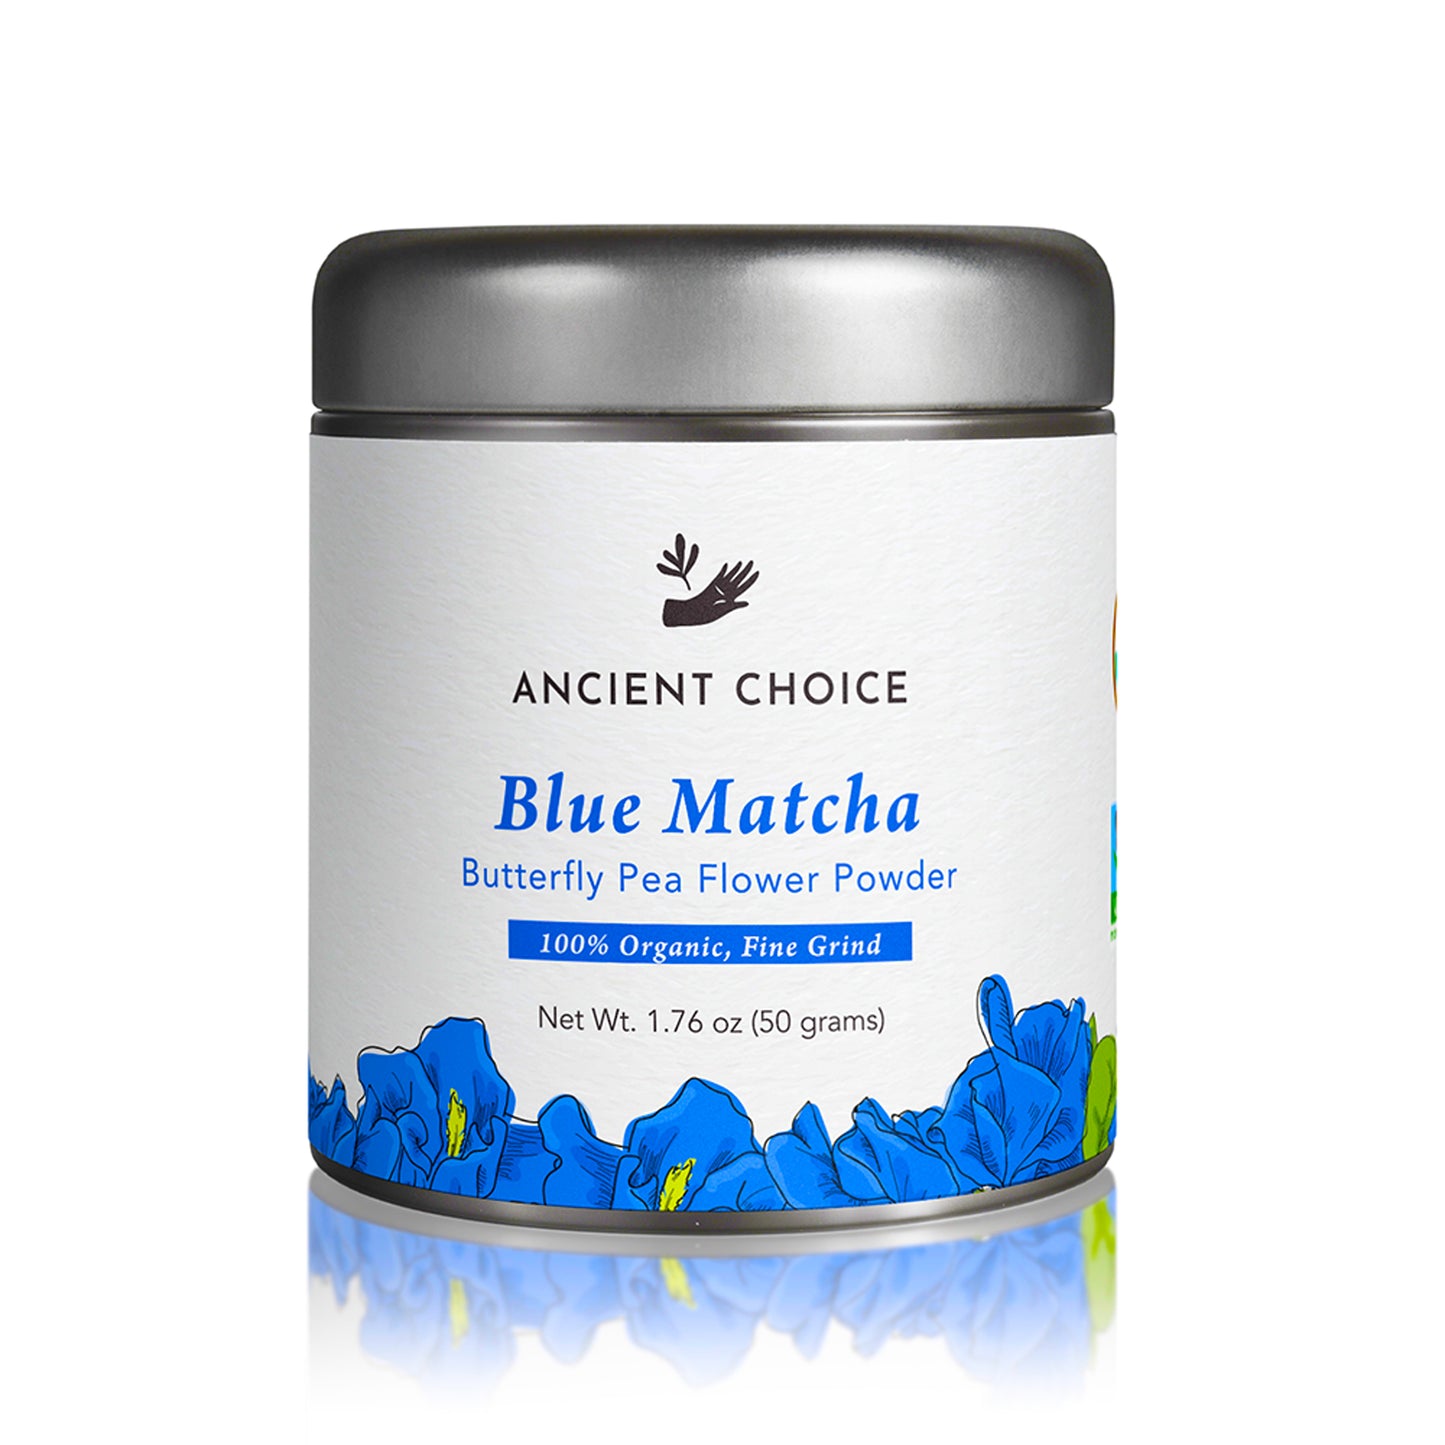 Ancient Choice Blue Matcha Tin Canister, Fine Grind, 50 grams